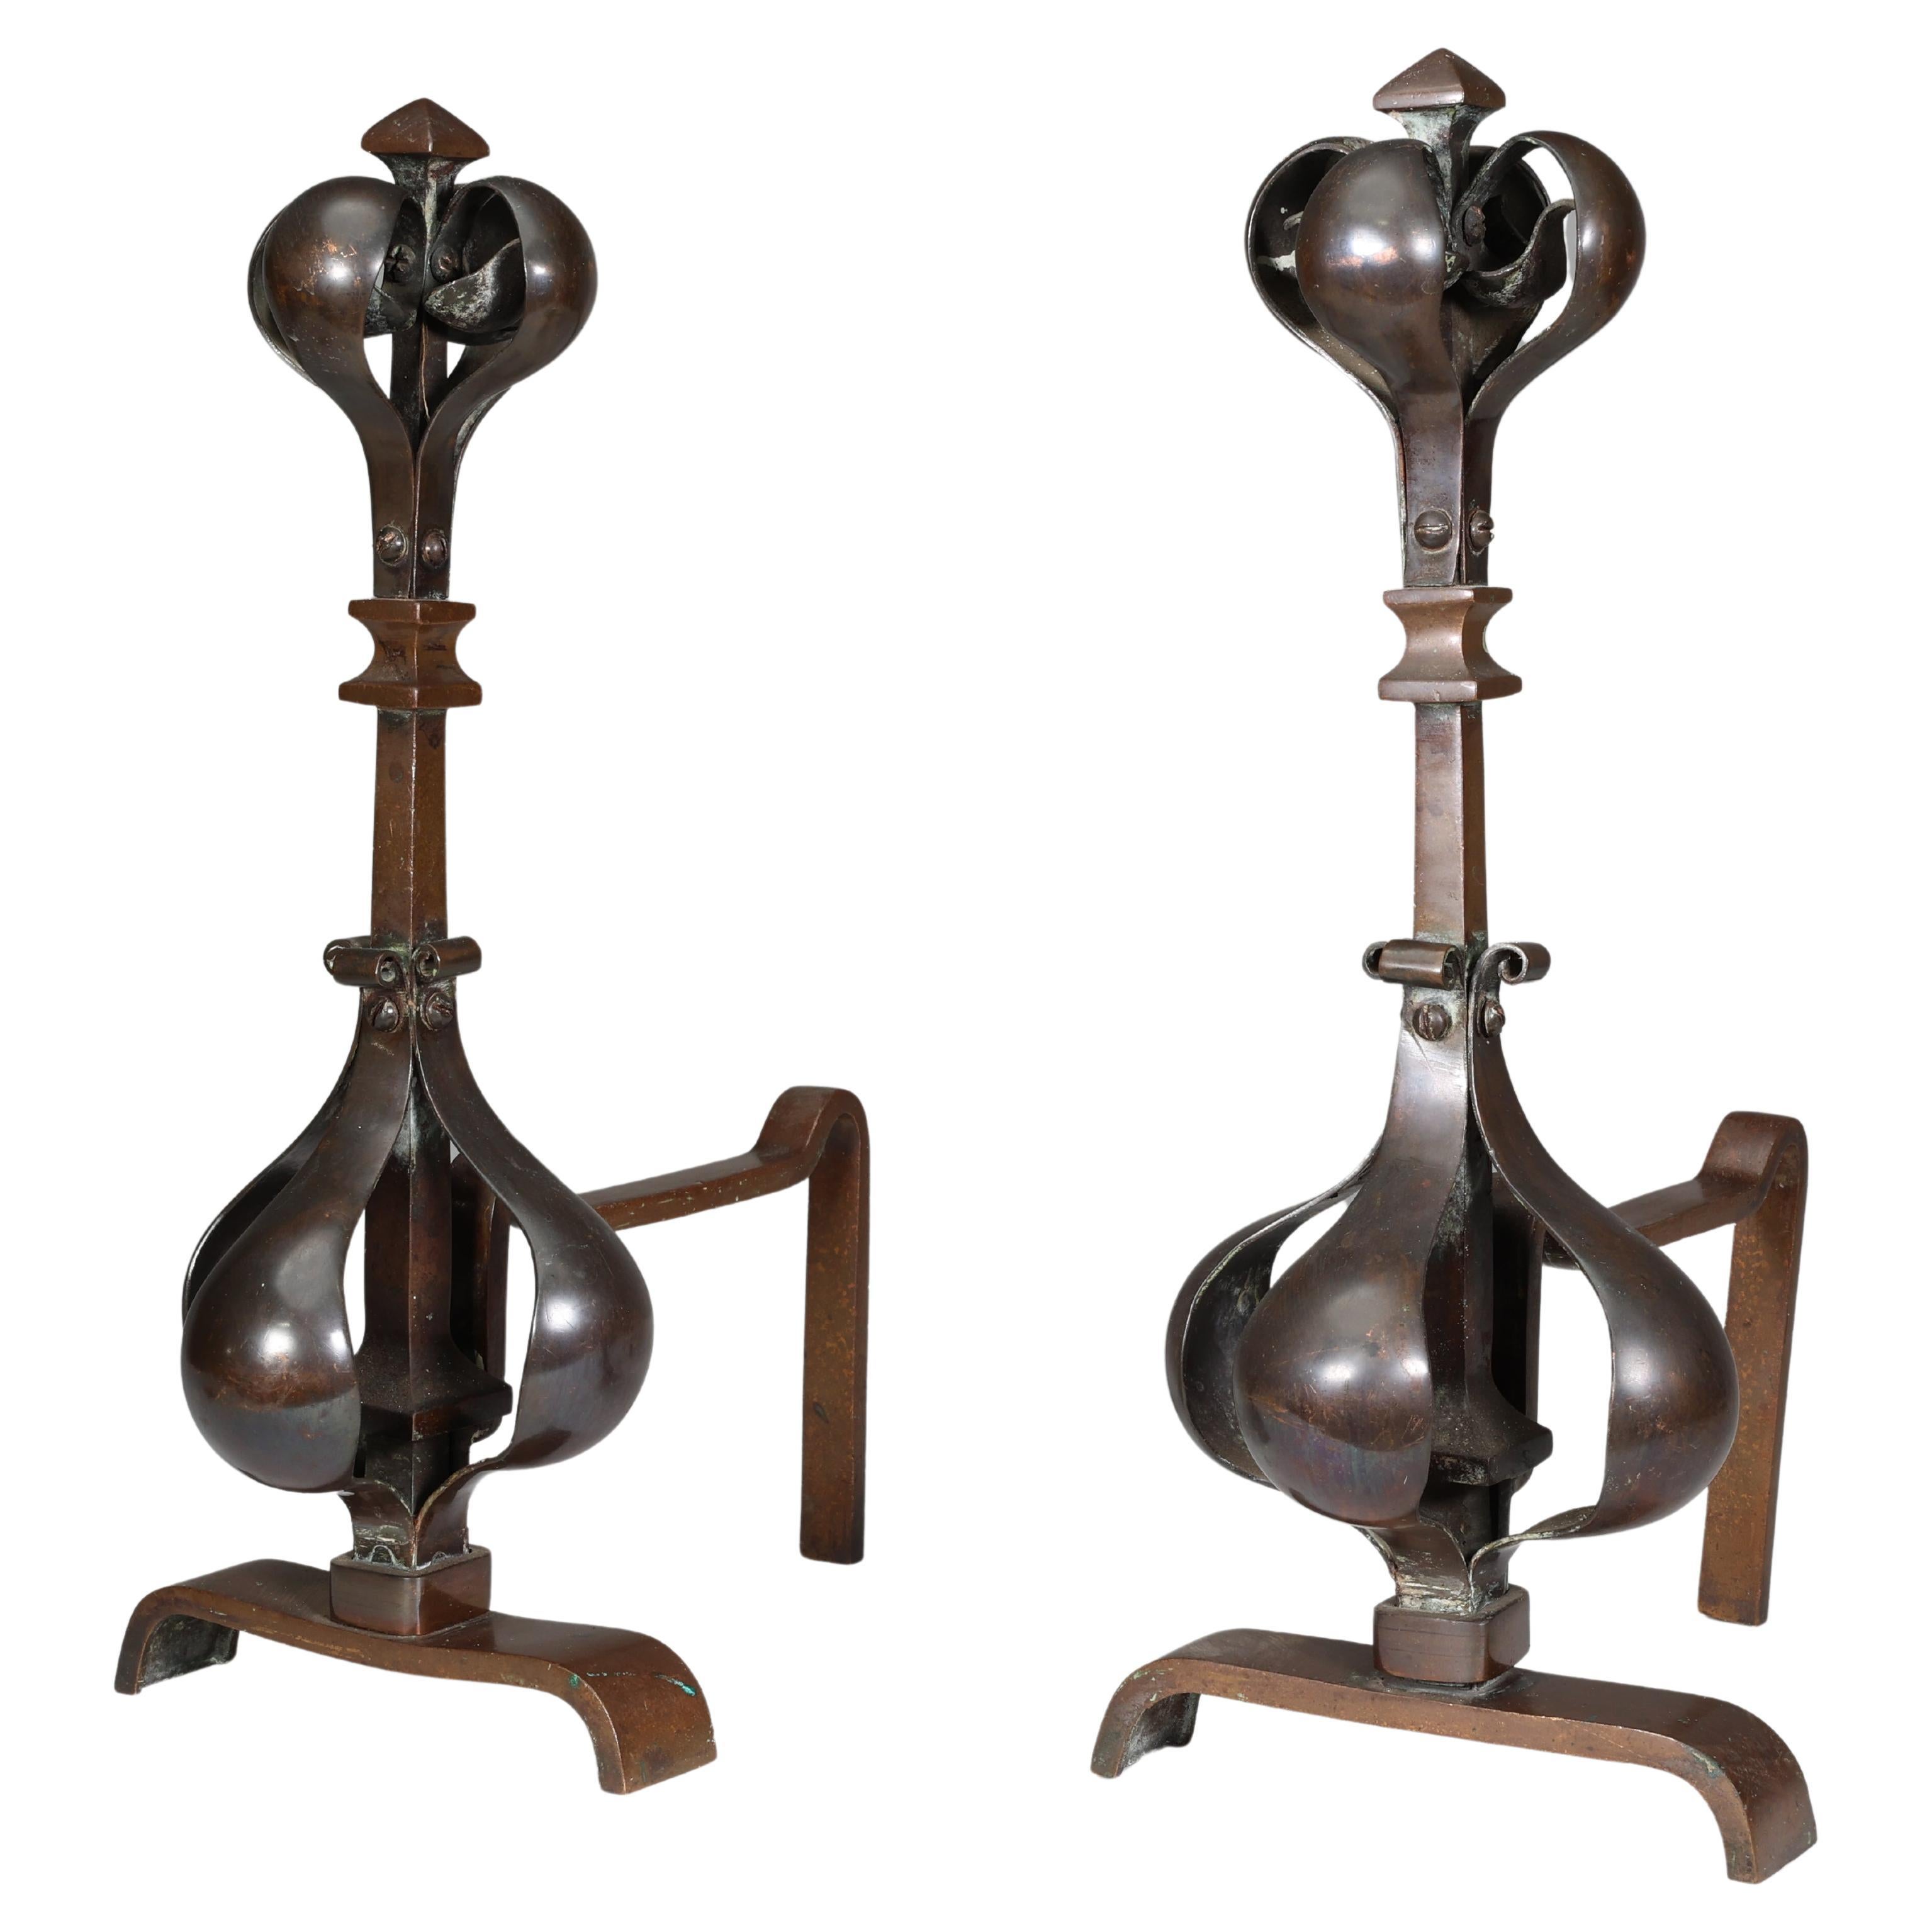 A pair of Arts and Crafts copper and bronze fire dogs with pyramid style finials